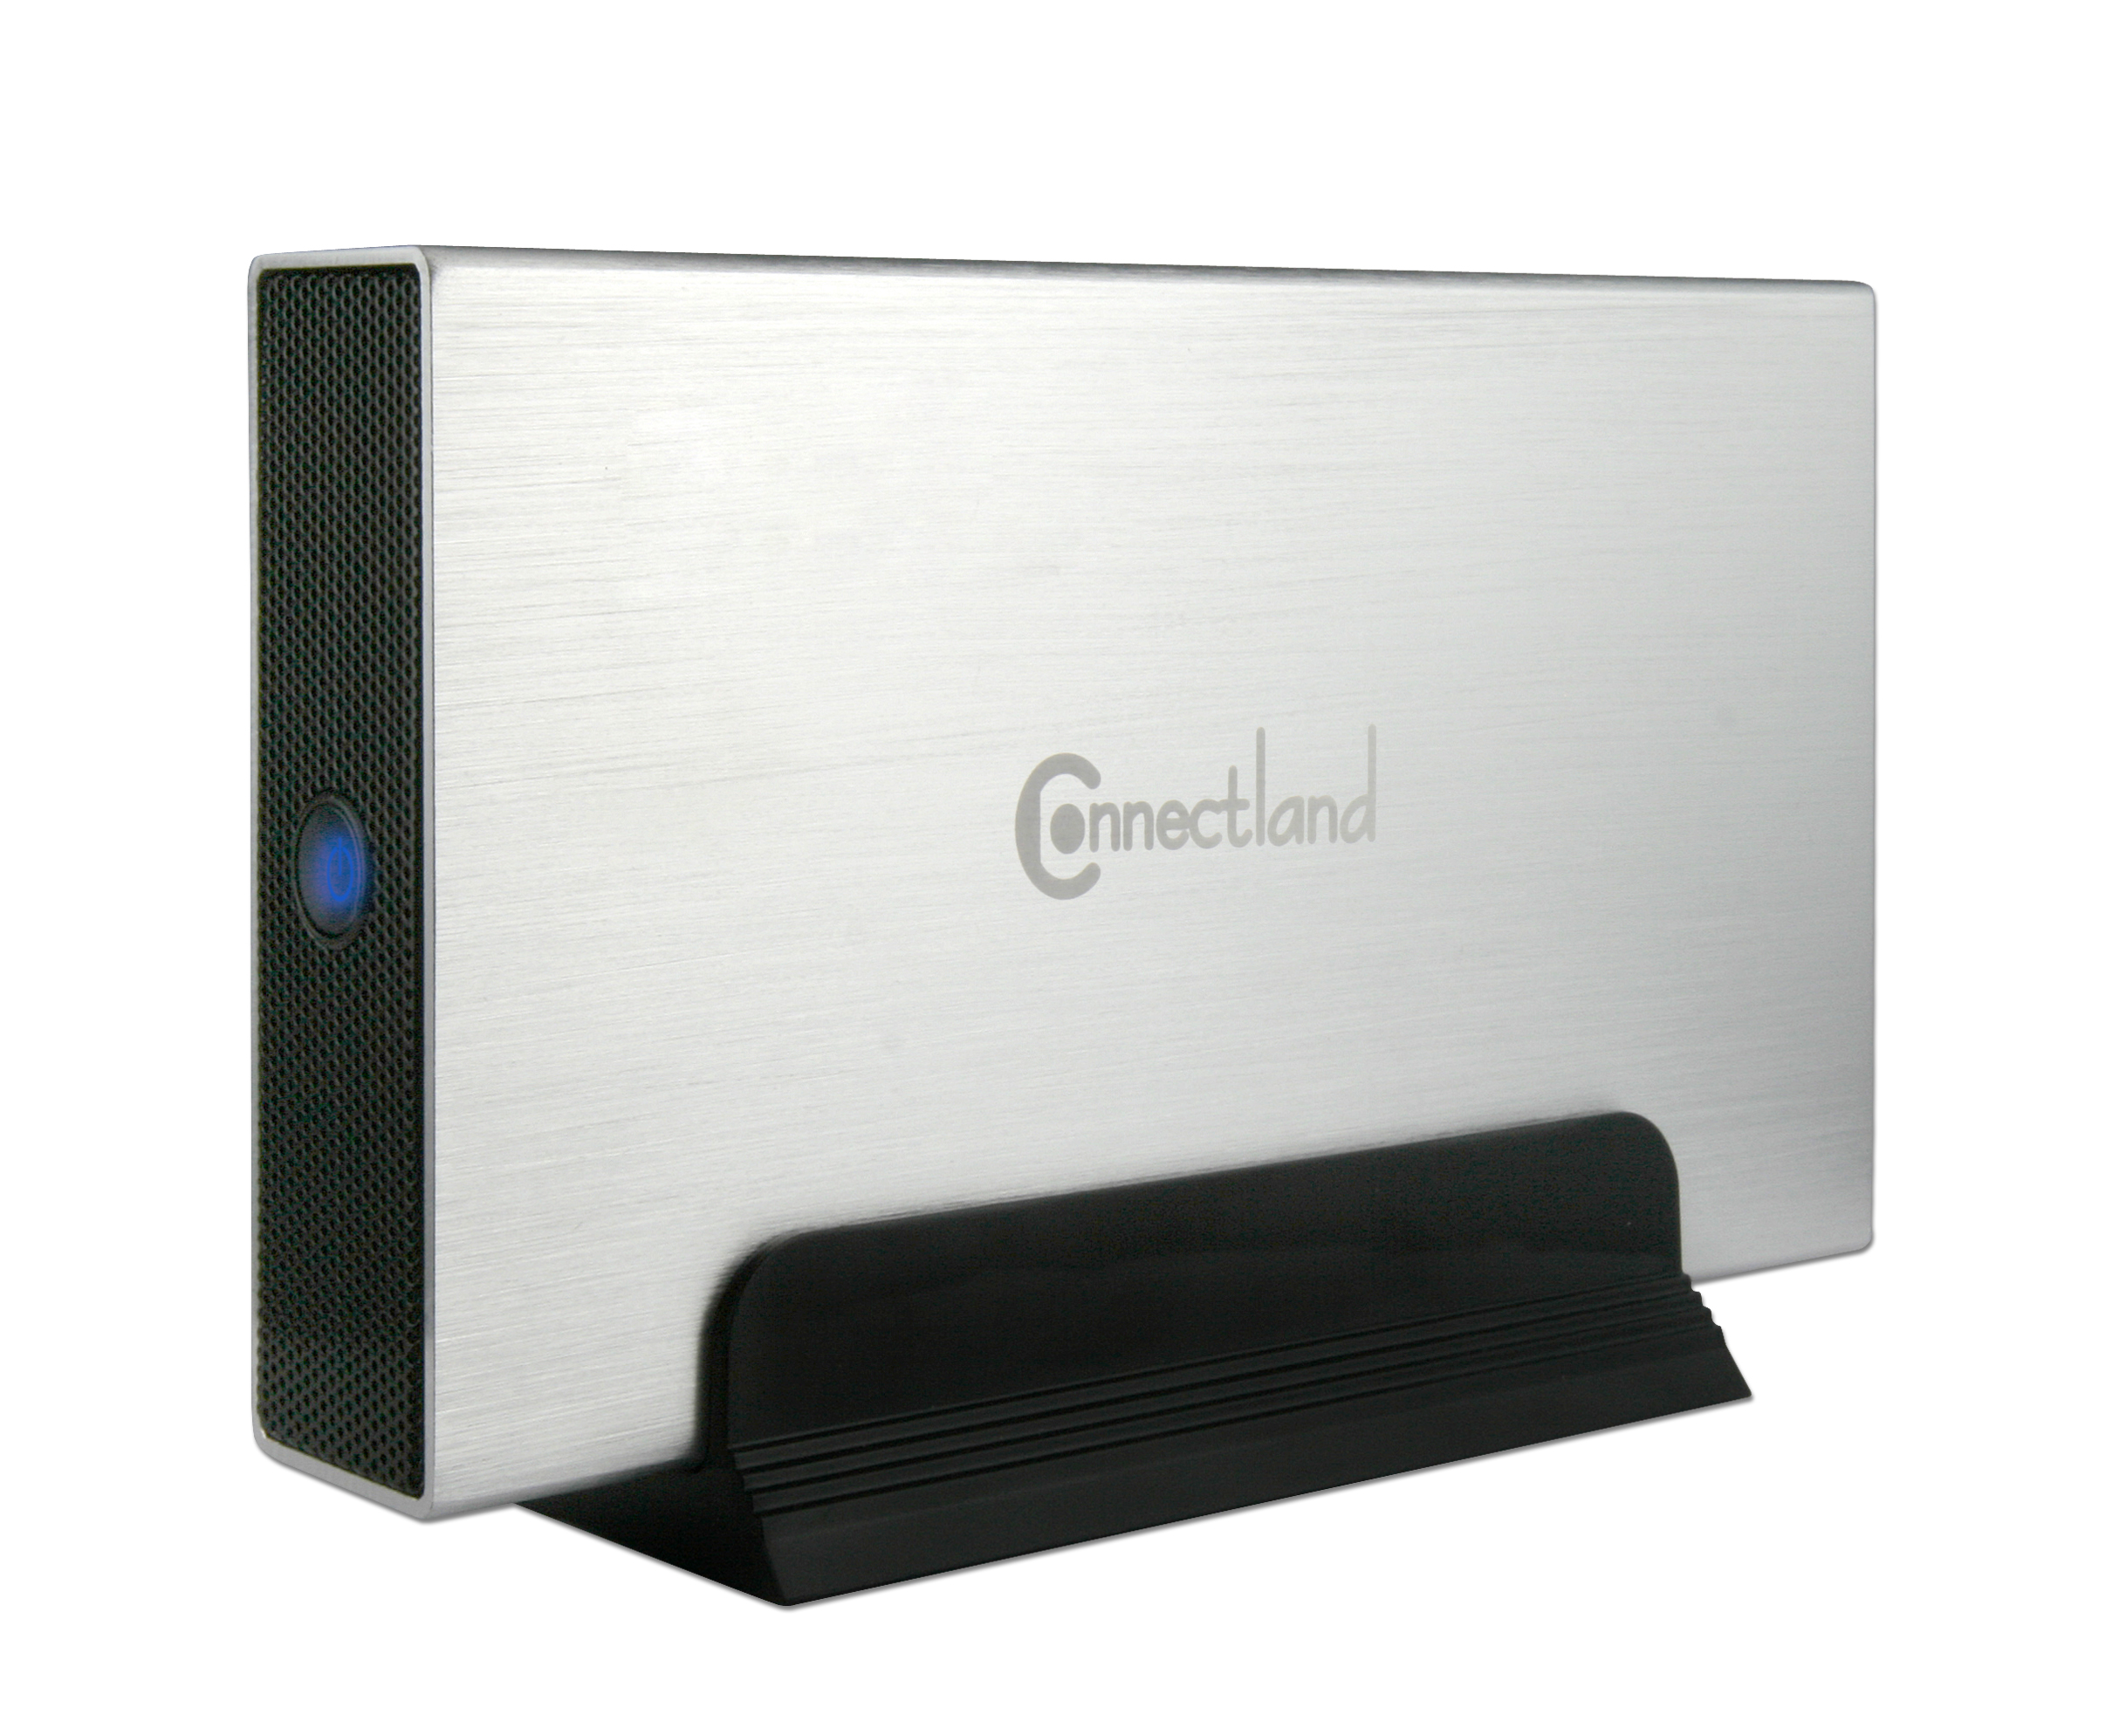 Connectland CONNECTLAND Boitier externe USB 3.0-2'1/2 S-ATA Rouge 